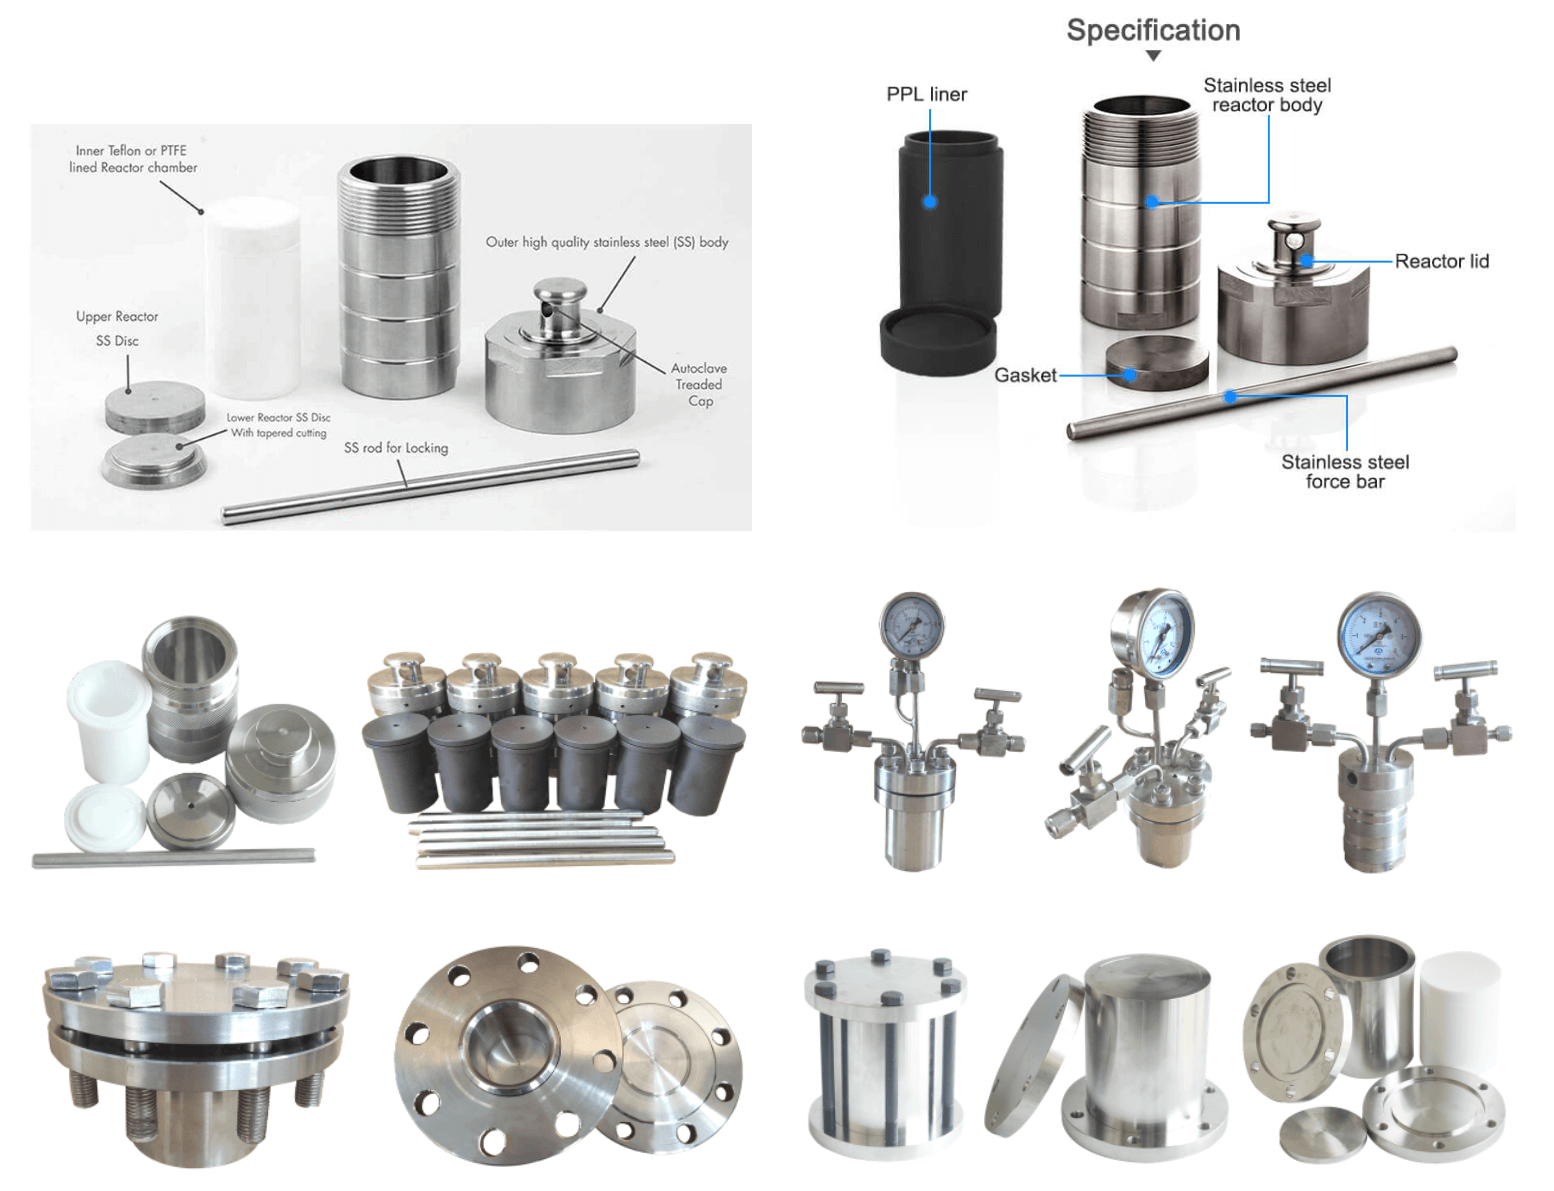 Hydrothermal Synthesis Reactor With PPL Liner 280℃;